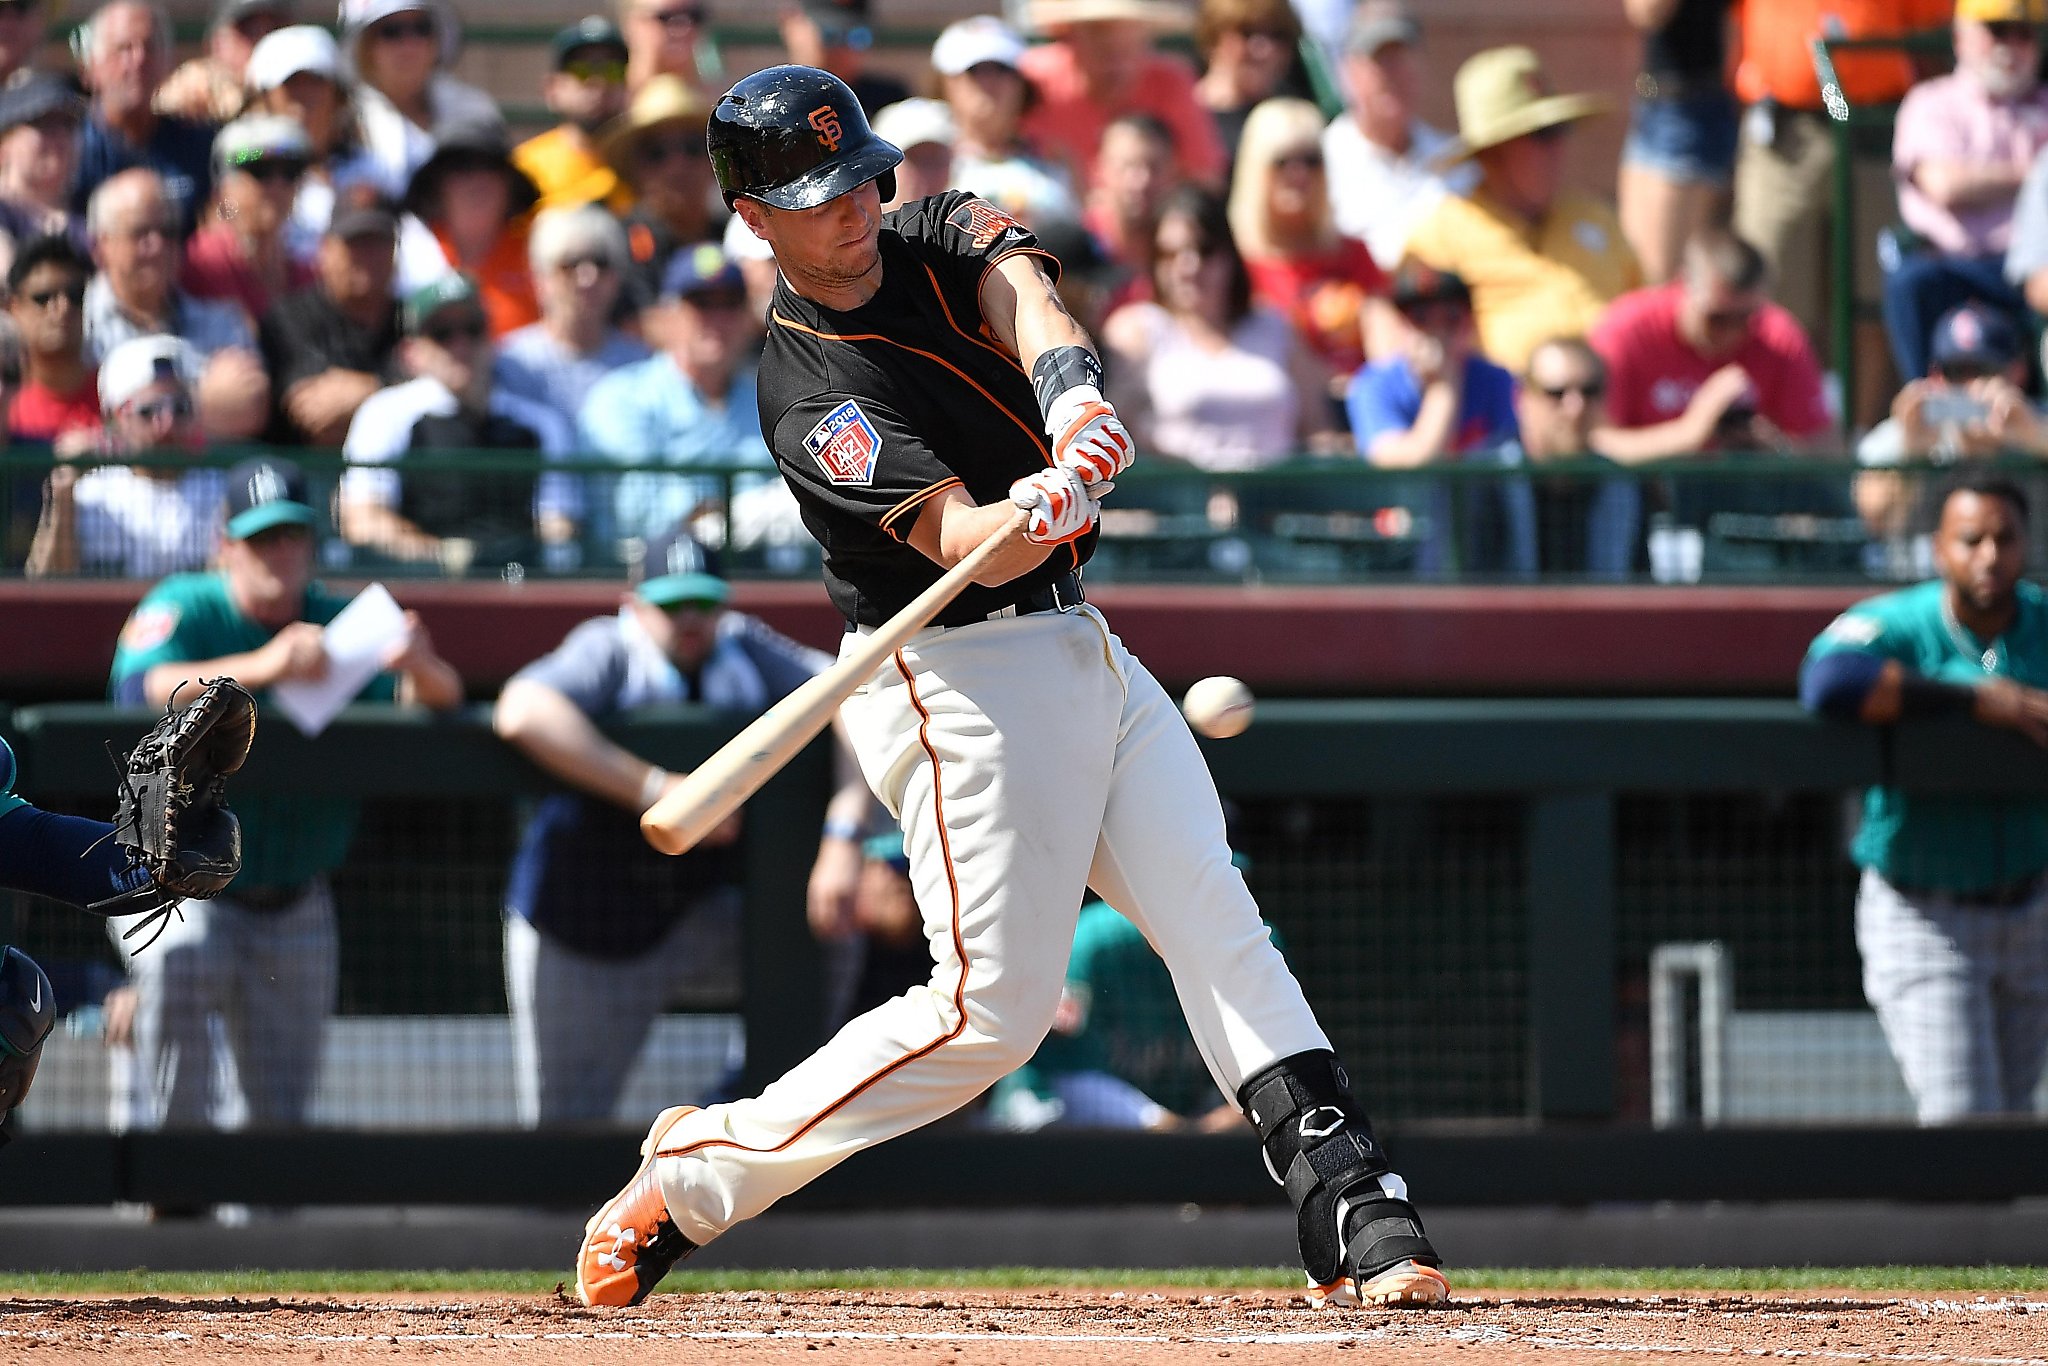 Giants’ Buster Posey has three hits in return - SFGate